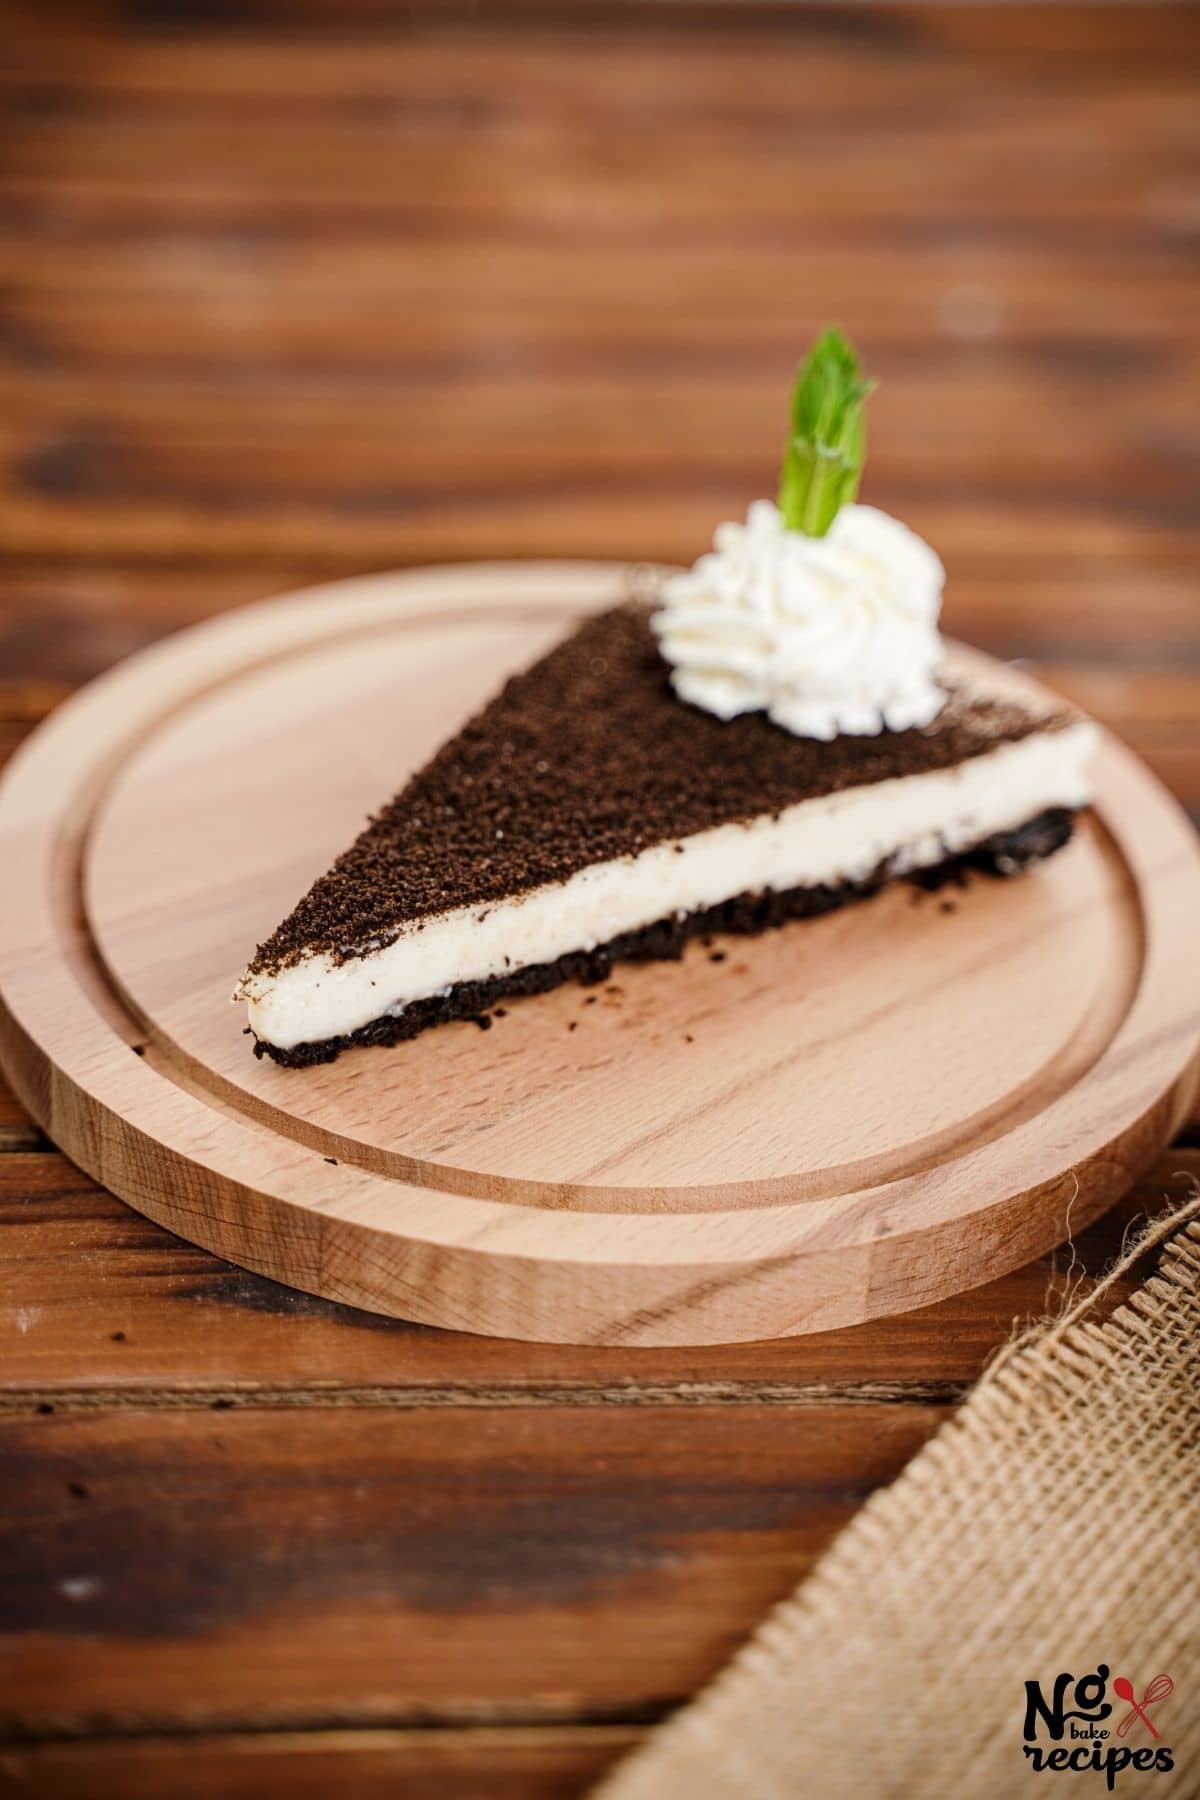 round wood plate on wood table topped with cheesecake slice